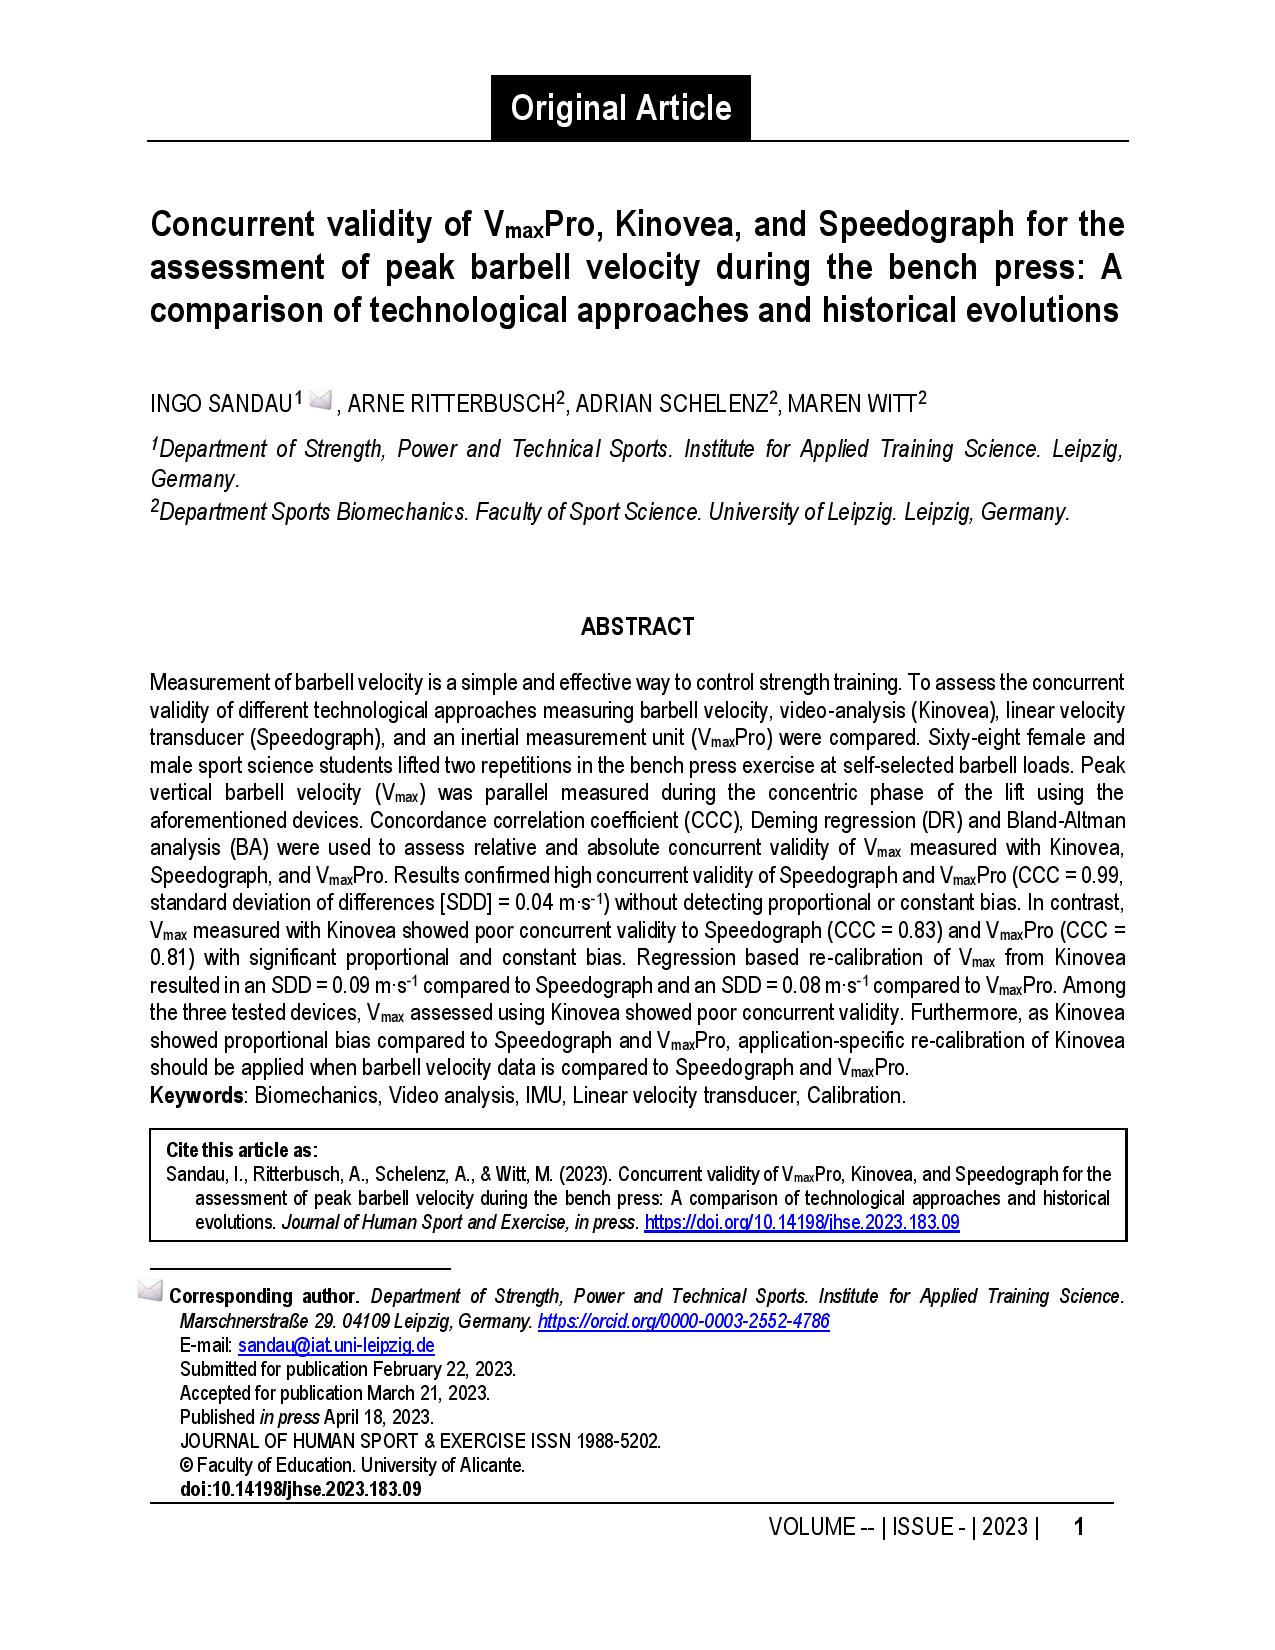 Concurrent validity of VmaxPro, Kinovea, and Speedograph for the assessment of peak barbell velocity during the bench press: A comparison of technological approaches and historical evolutions